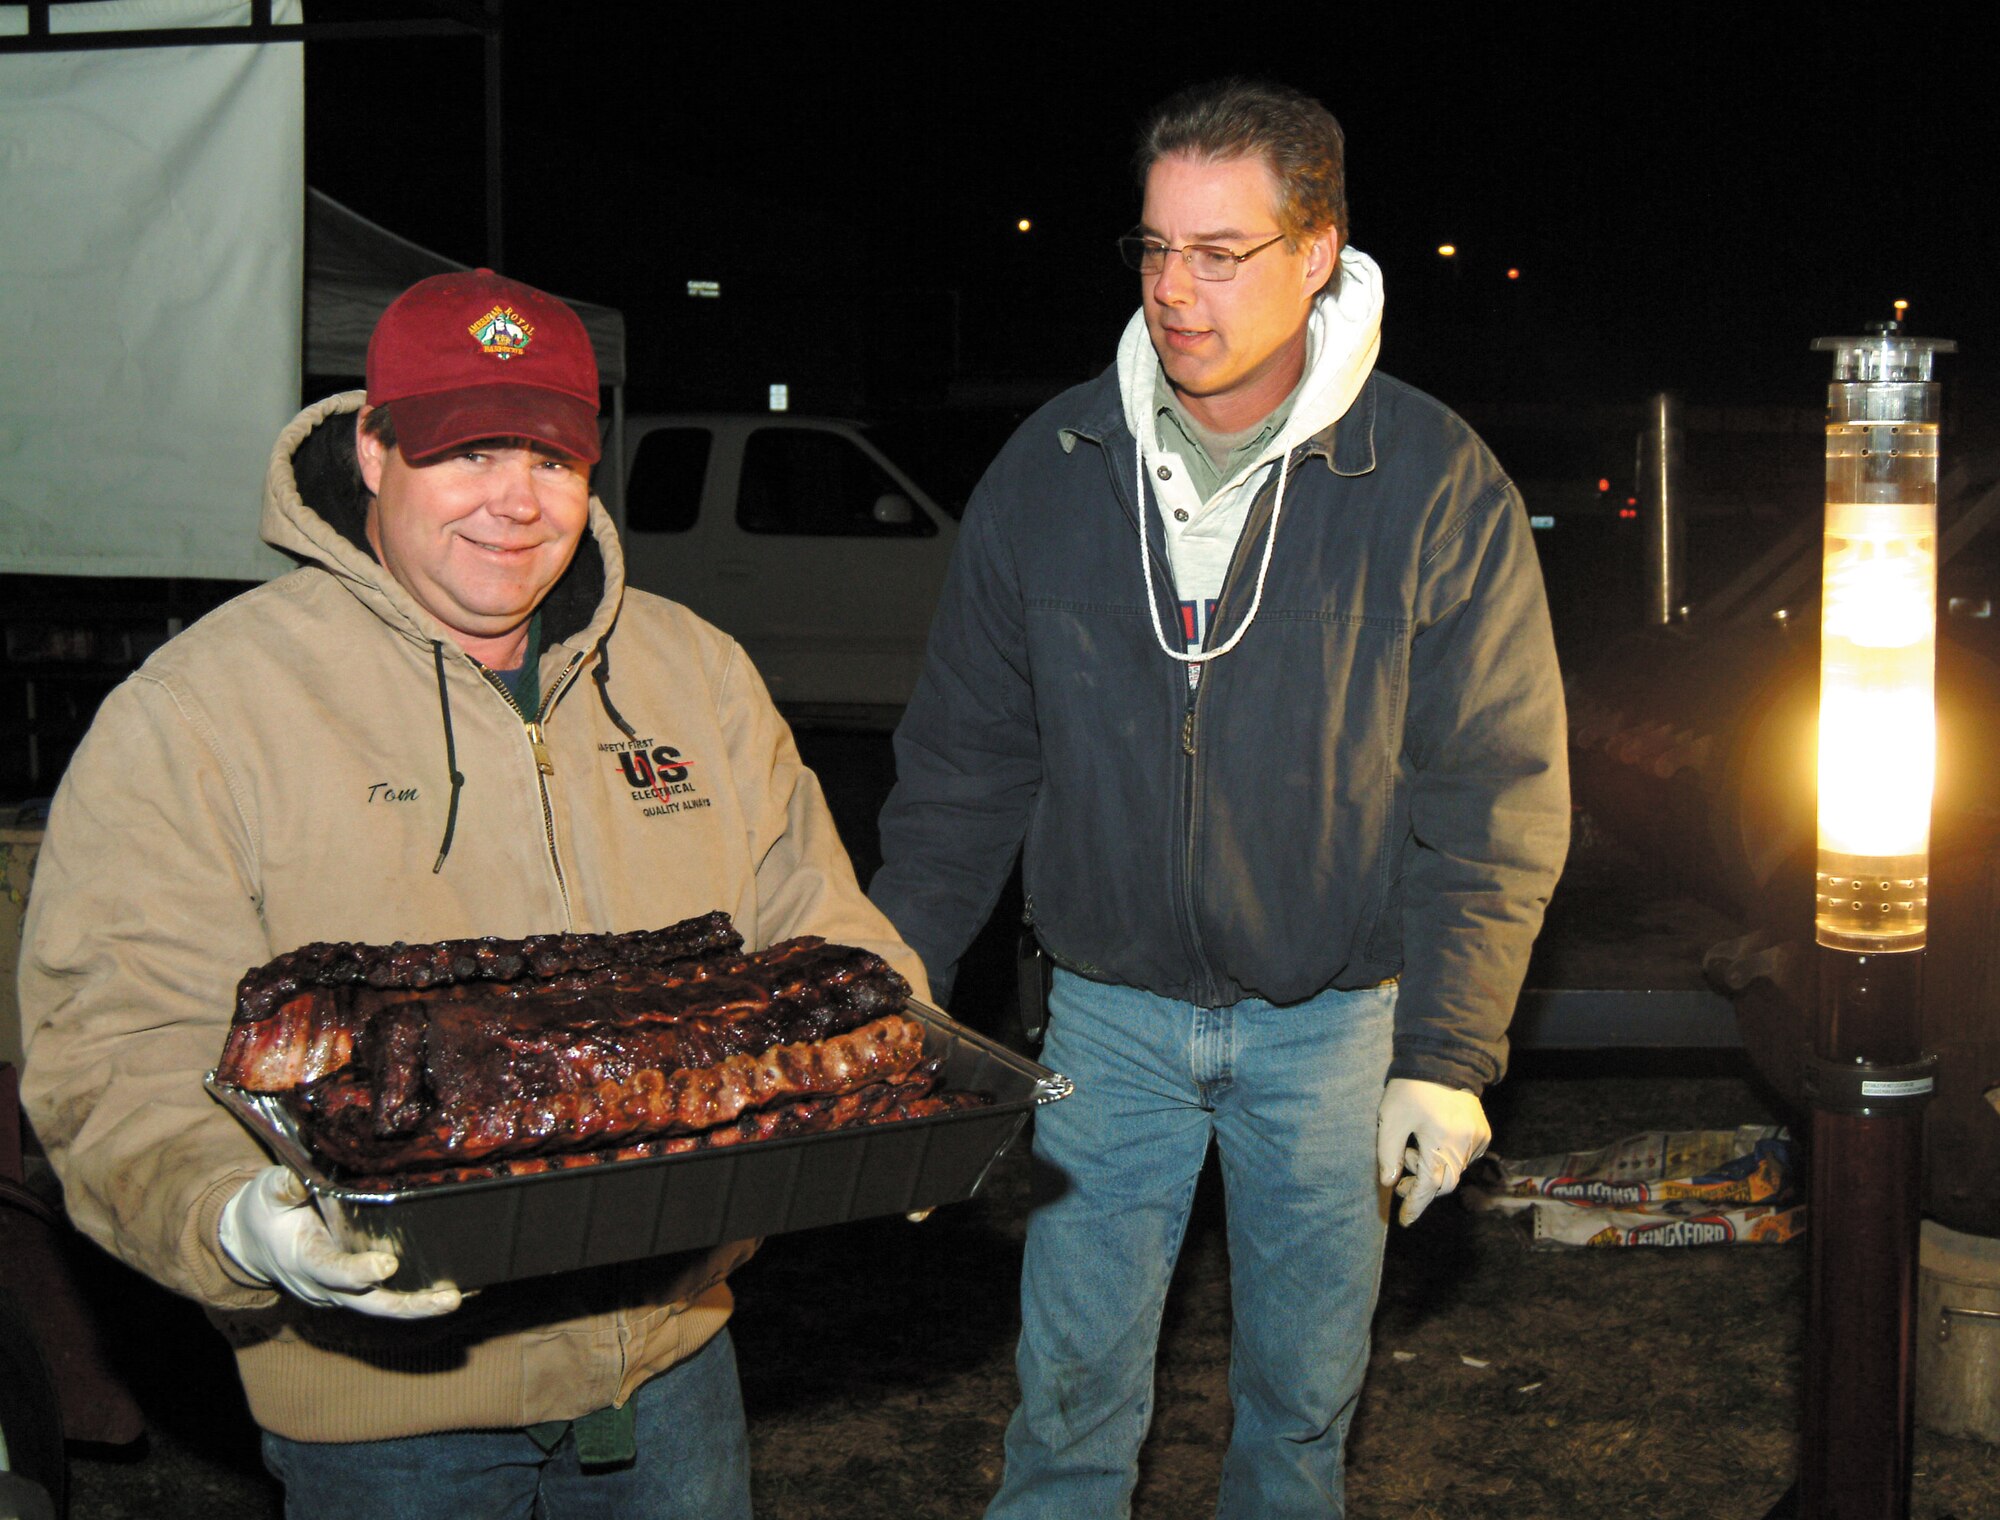 Tom Henderson and Steve Frerichs were among the volunteers cooking food at 3:30 a.m. for the 442nd Fighter Wing Family Day picnic Oct. 14, 2006.  (U.S. Air Force photo/Master Sgt. Bill Huntington)